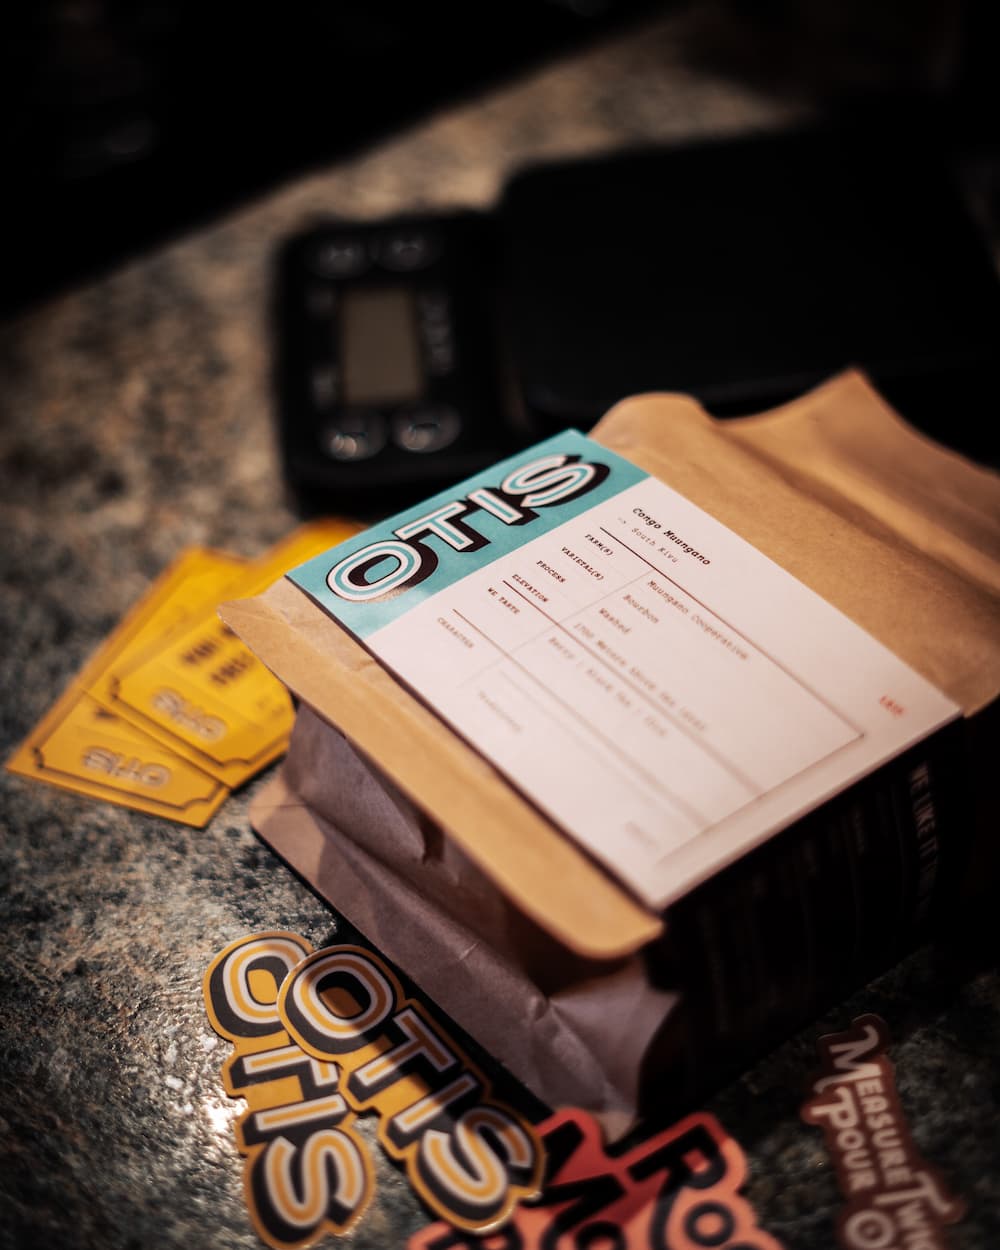 Specialty coffee from OTIS along with free drink cards and stickers